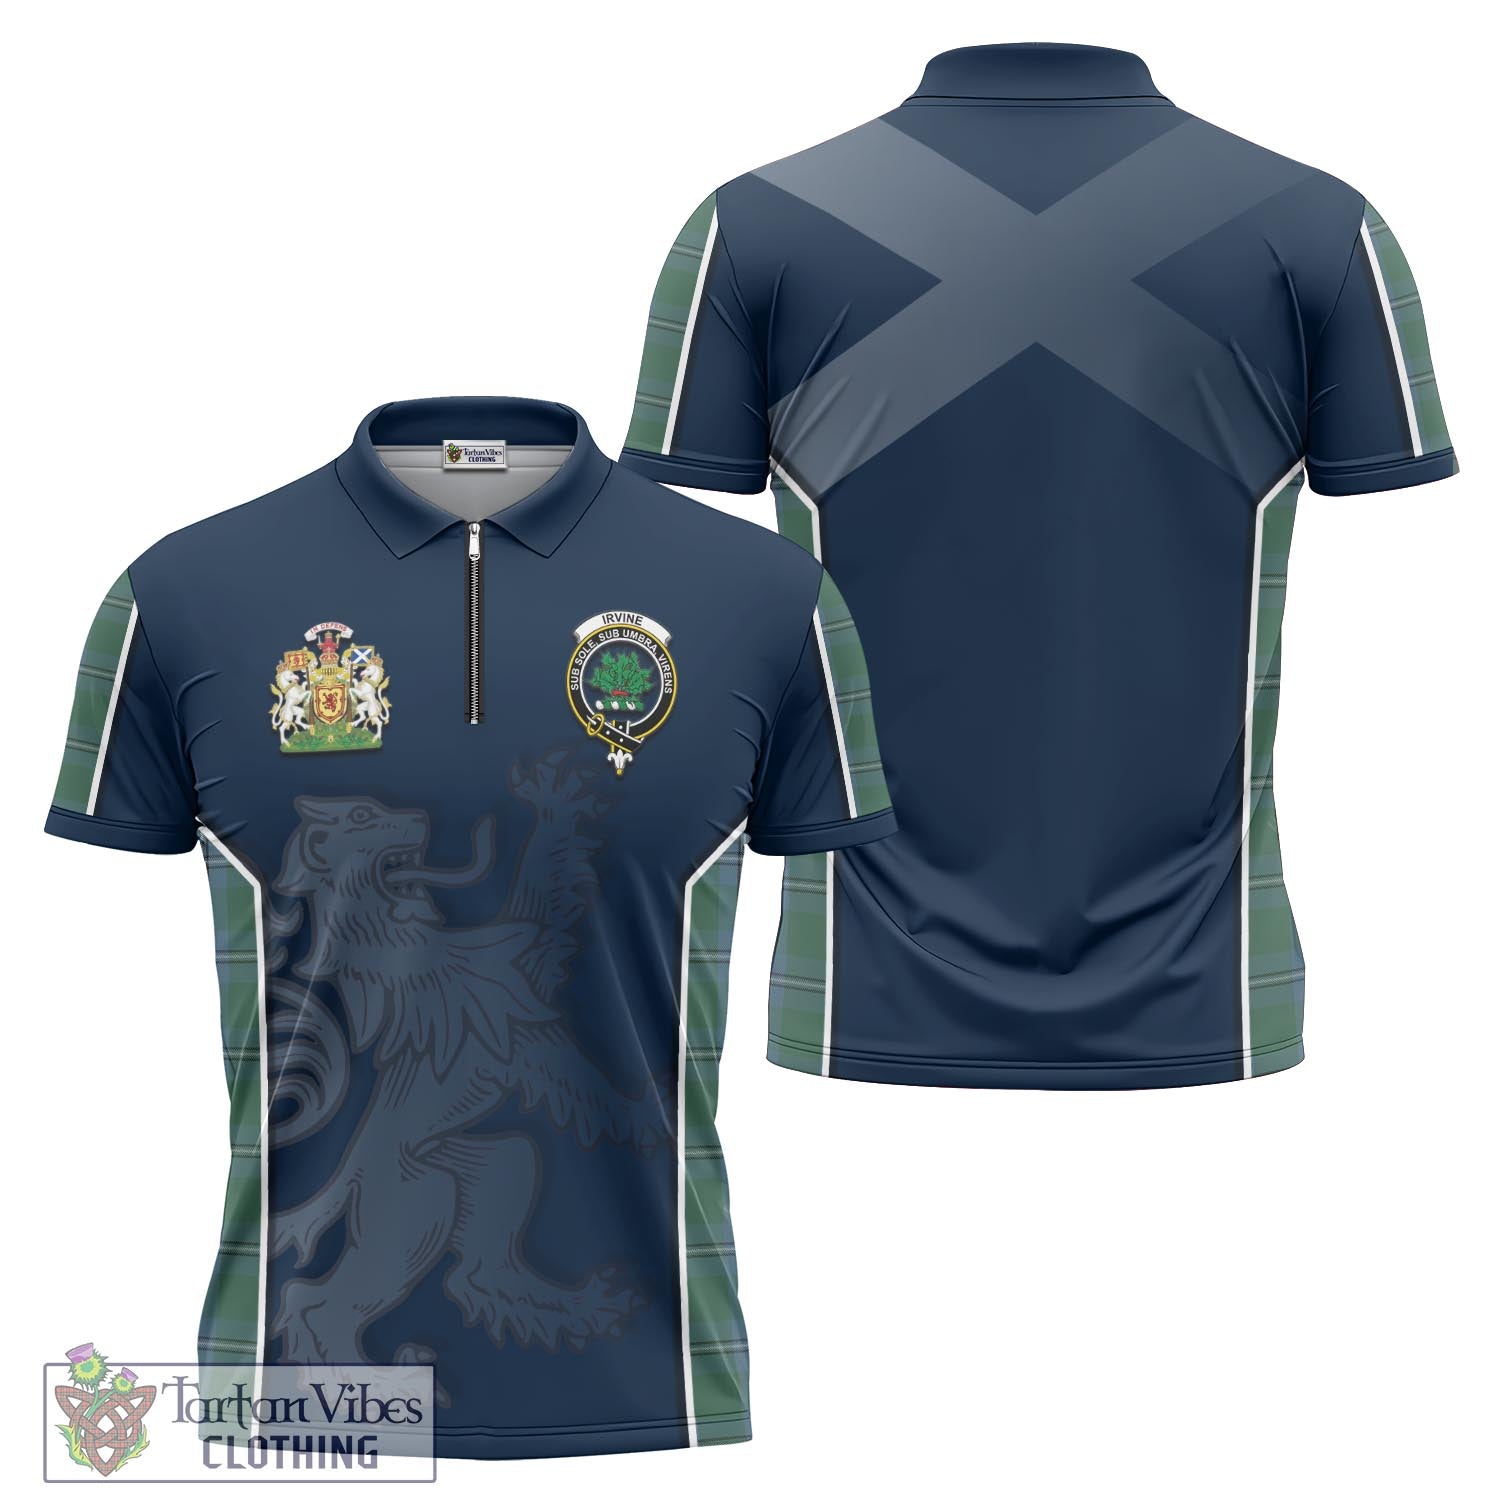 Tartan Vibes Clothing Irvine of Drum Tartan Zipper Polo Shirt with Family Crest and Lion Rampant Vibes Sport Style